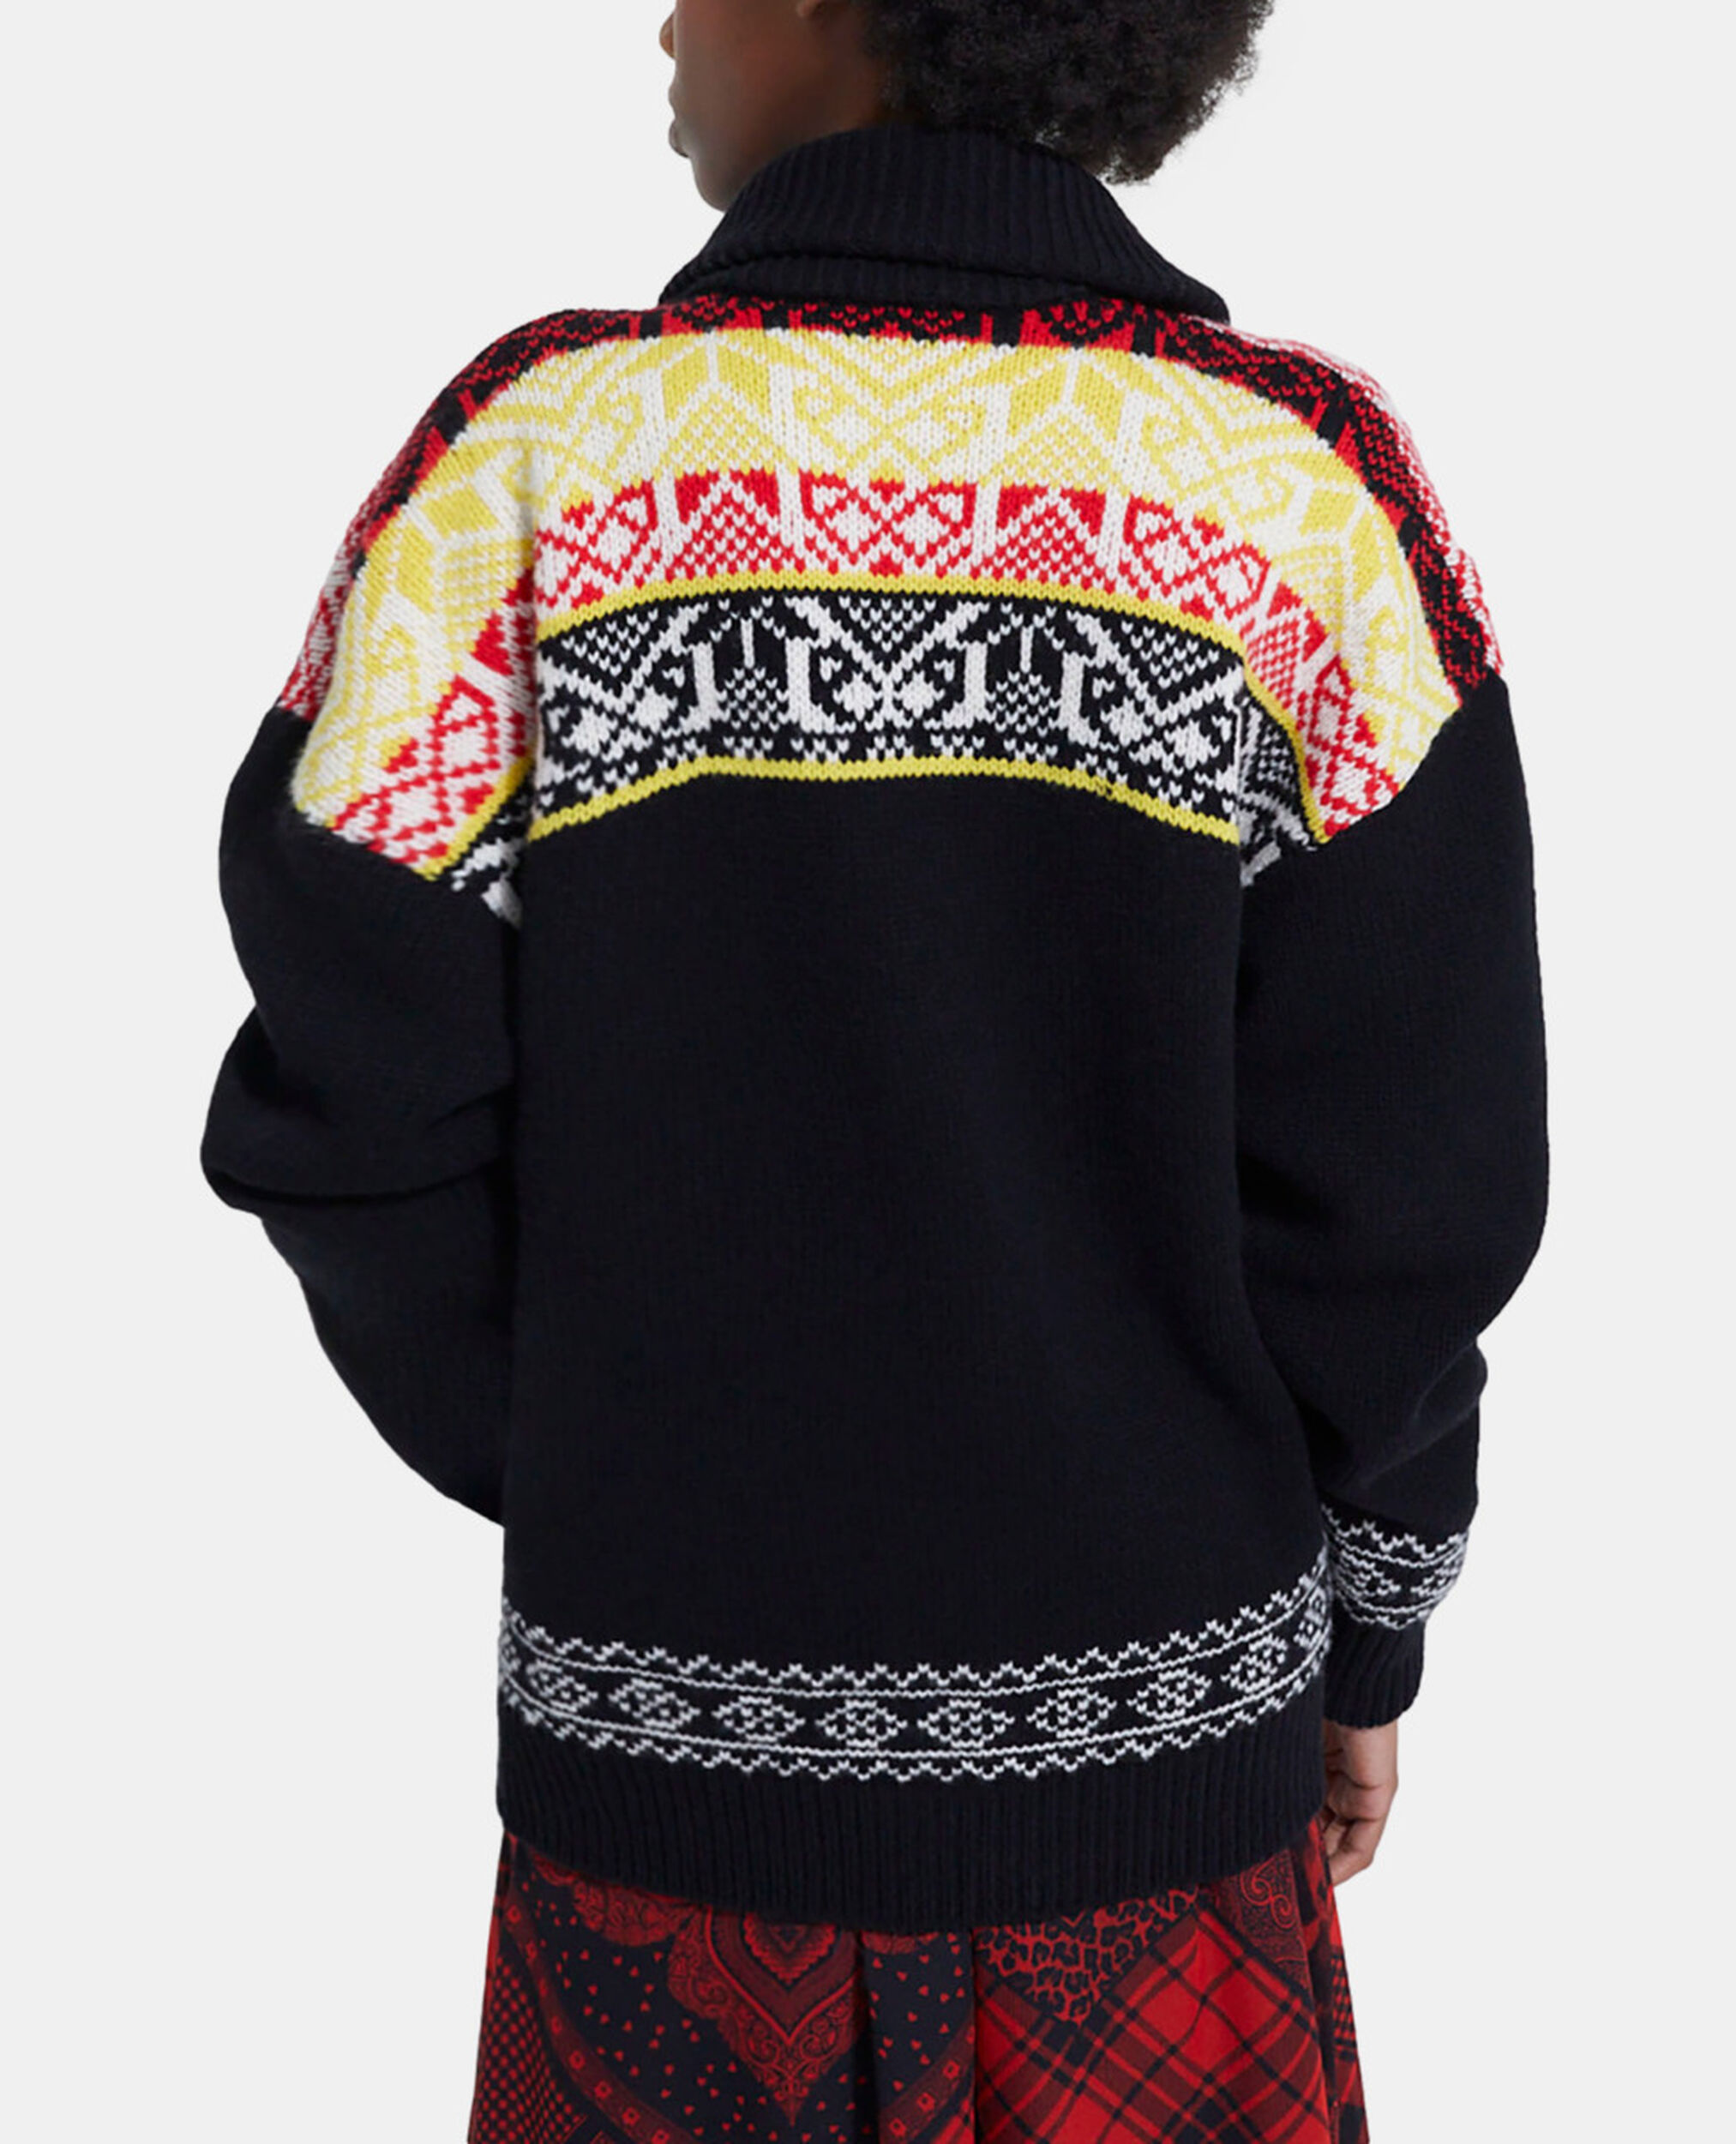 Patterned wool cardigan, BLACK / RED / YELLOW, hi-res image number null